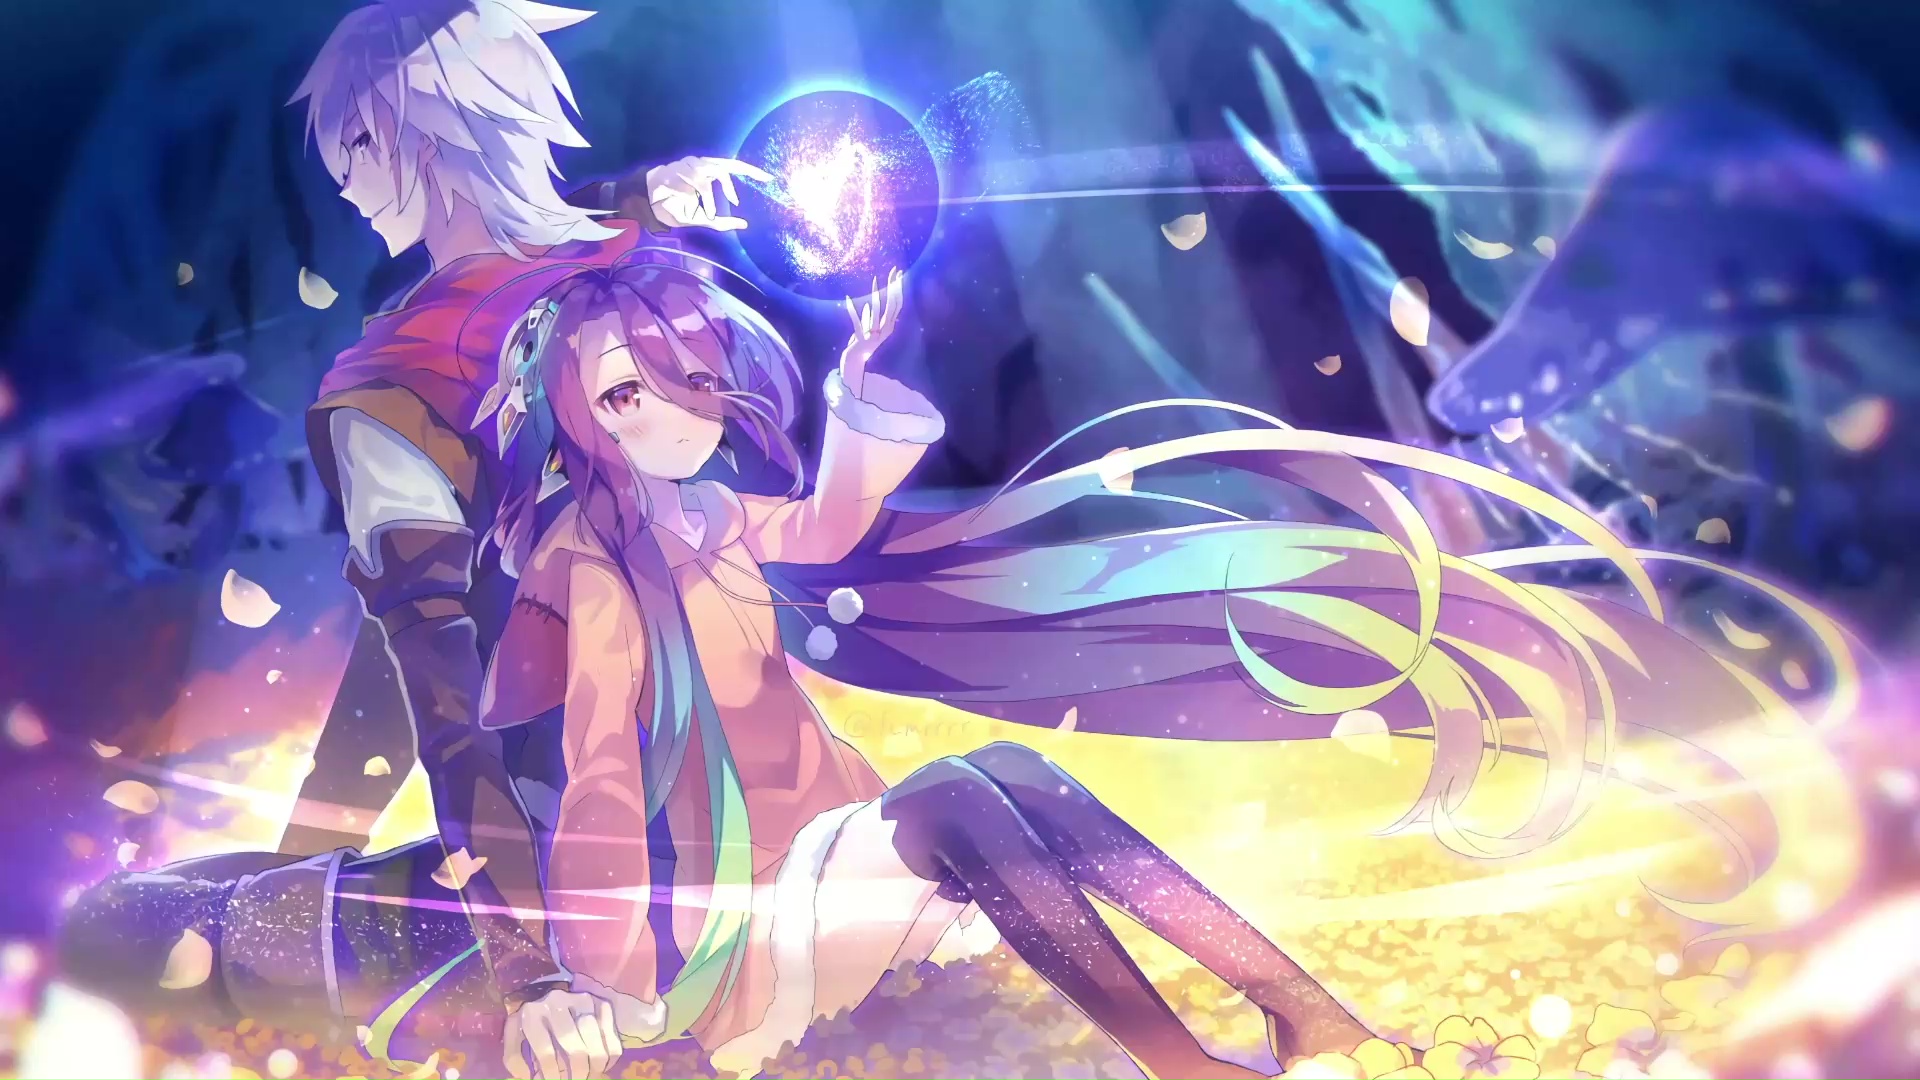 670 No Game No Life HD Wallpapers and Backgrounds